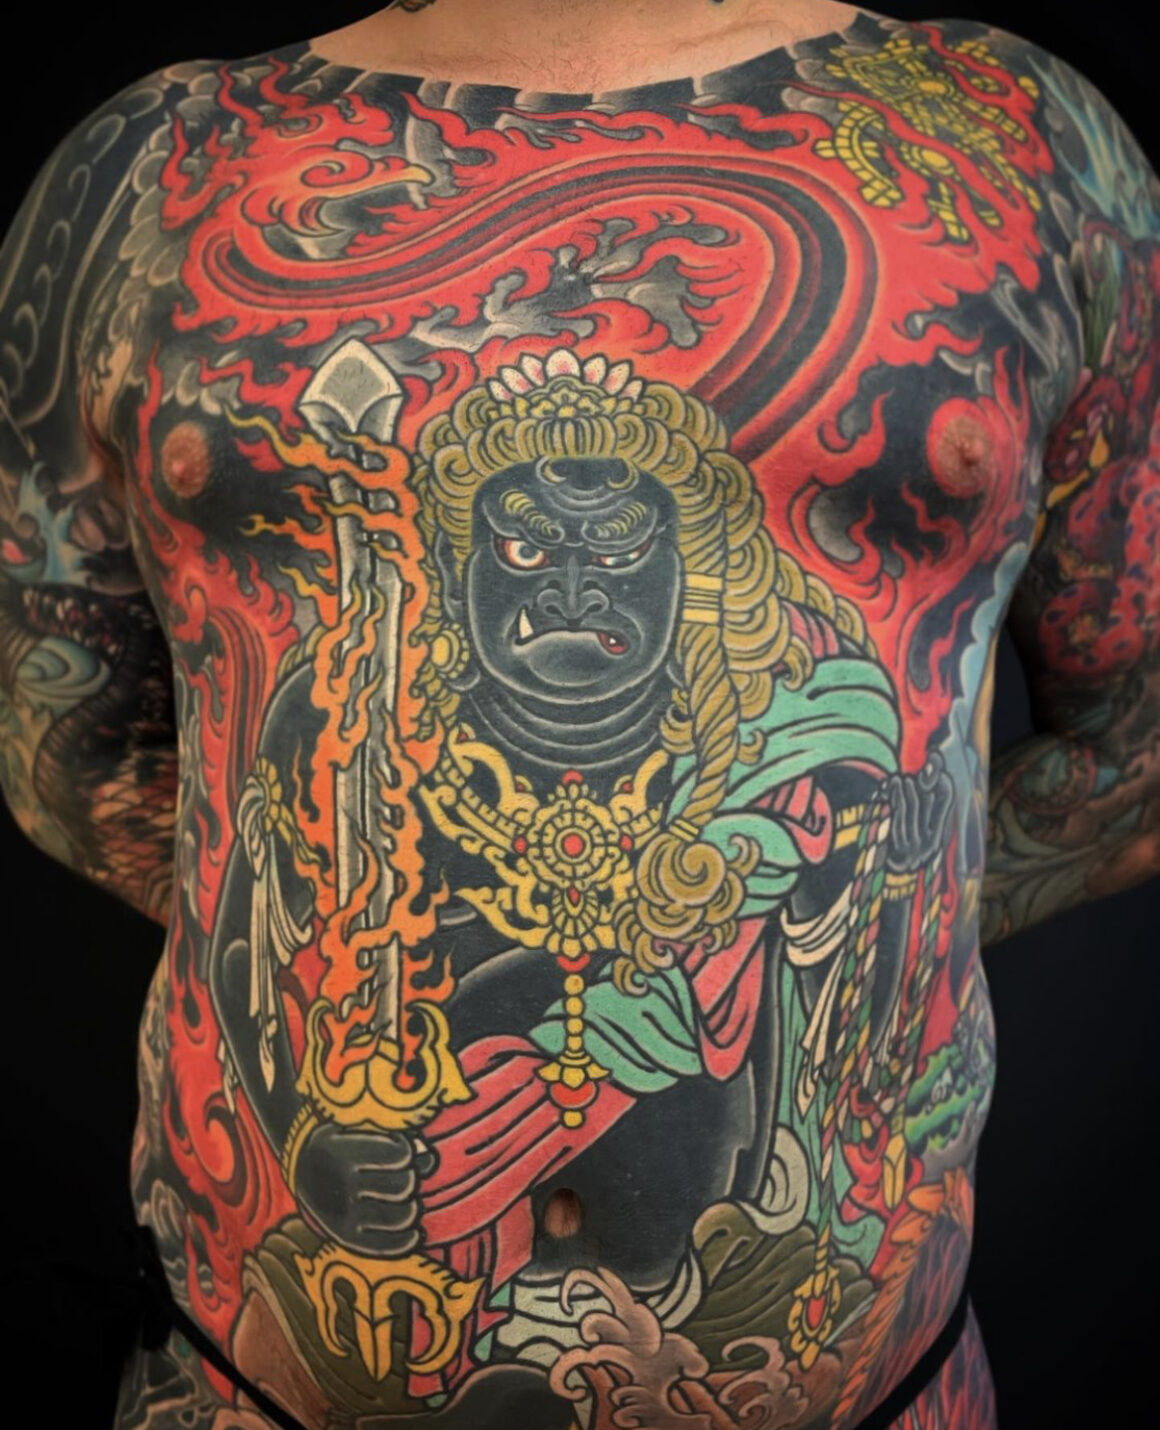 Gods and divinities in the Japanese Tattoo Culture - Tattoo Life